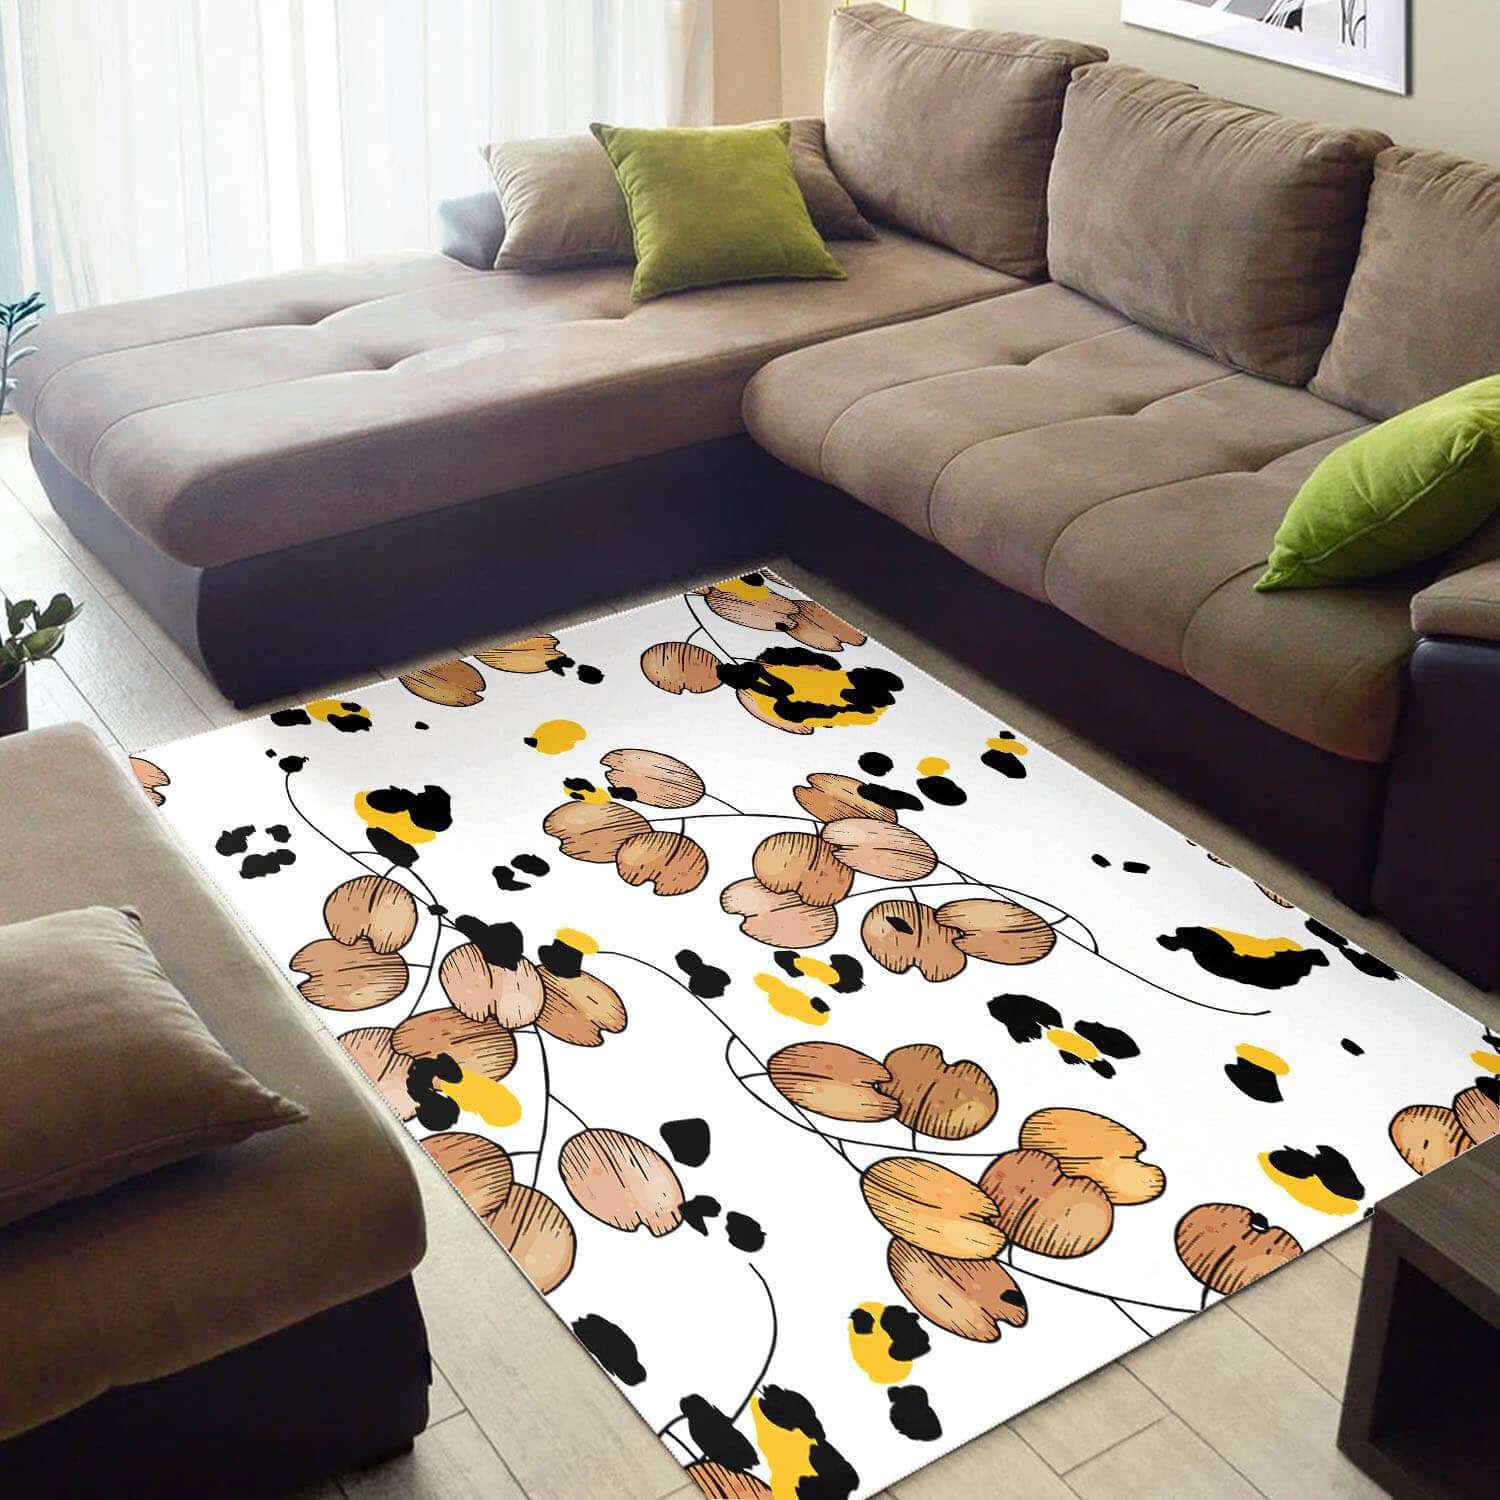 Modern African Style Vintage Black History Month Afrocentric Art Themed House Rug